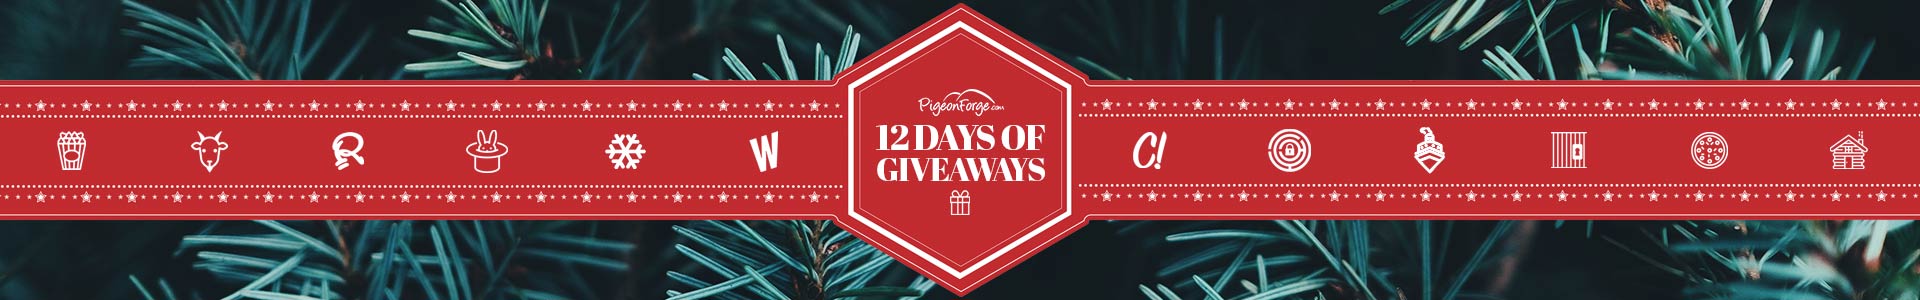 12 Days Of Giveaways In Pigeon Forge: Click to visit page.